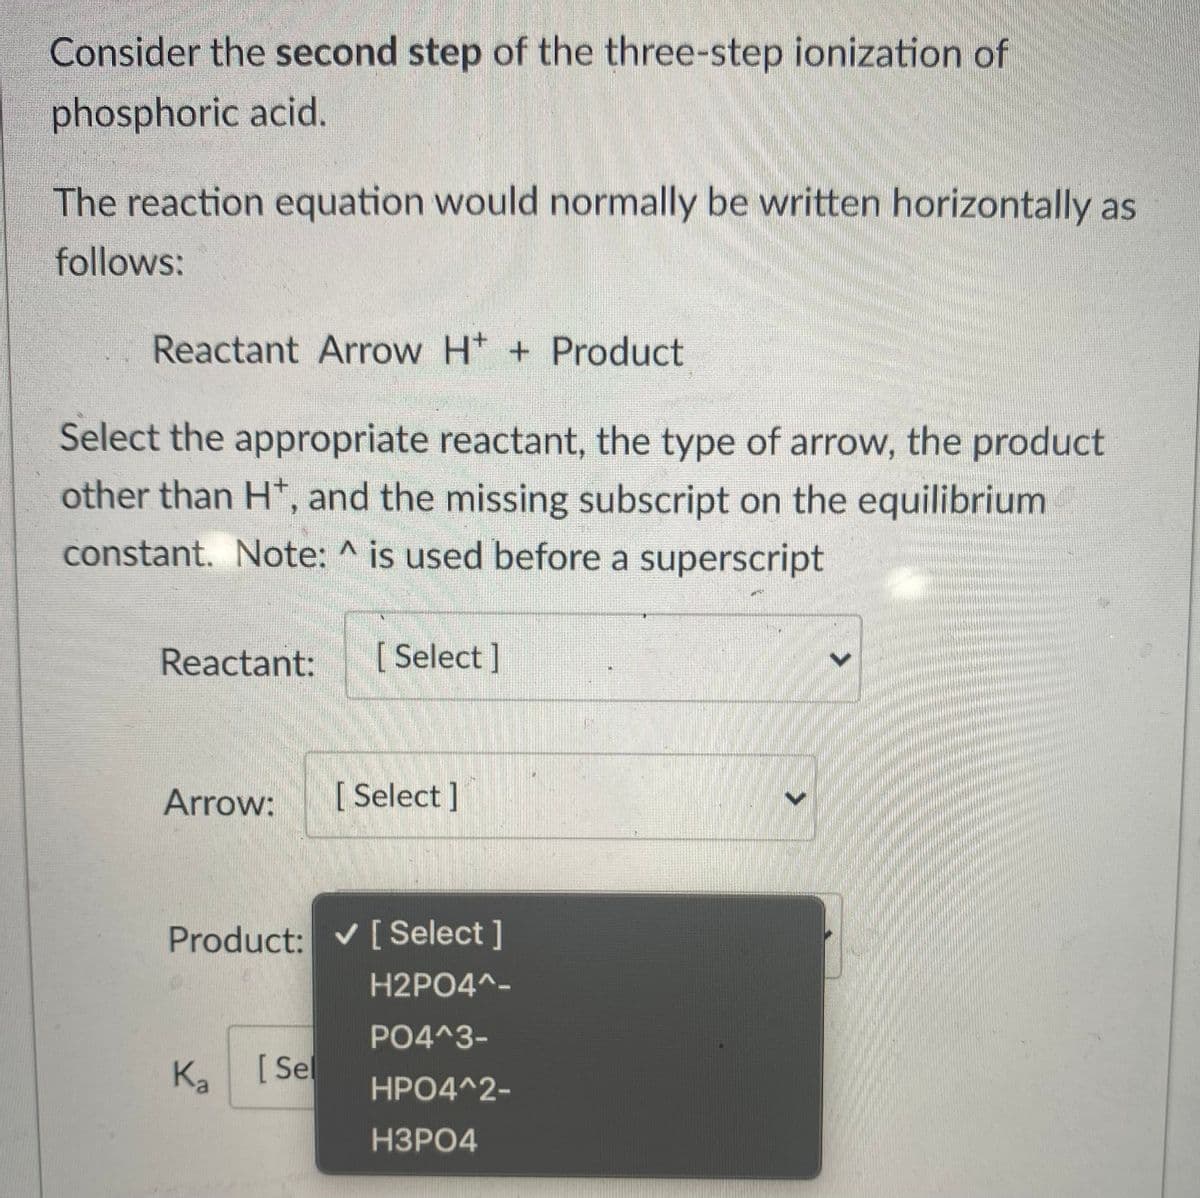 Consider the second step of the three-step ionization of
phosphoric acid.
The reaction equation would normally be written horizontally as
follows:
Reactant Arrow Ht + Product
Select the appropriate reactant, the type of arrow, the product
other than H*, and the missing subscript on the equilibrium
constant. Note: ^ is used before a superscript
Reactant:
[ Select ]
Arrow:
[ Select ]
Product: v [ Select]
H2PO4^-
PO4^3-
Ka
[ Sel
HPO4^2-
НЗРО4
